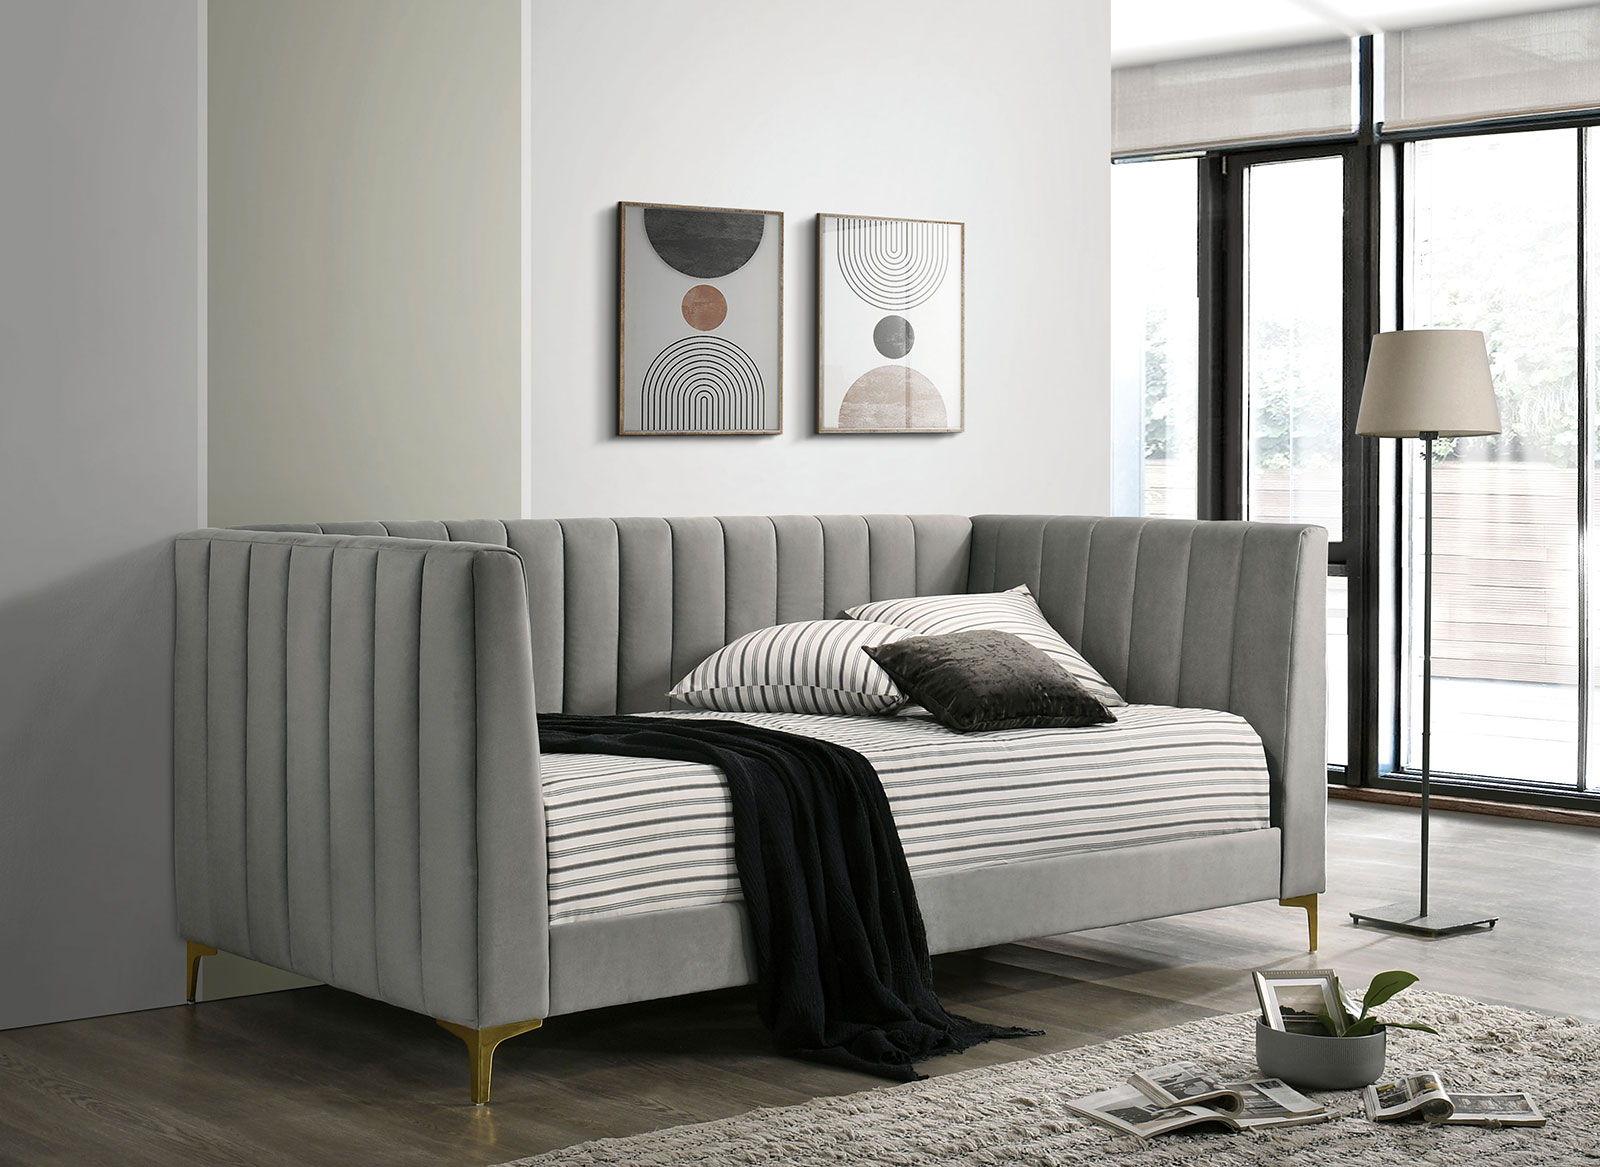 Furniture of America - Neoma - Twin Daybed - Light Gray - 5th Avenue Furniture